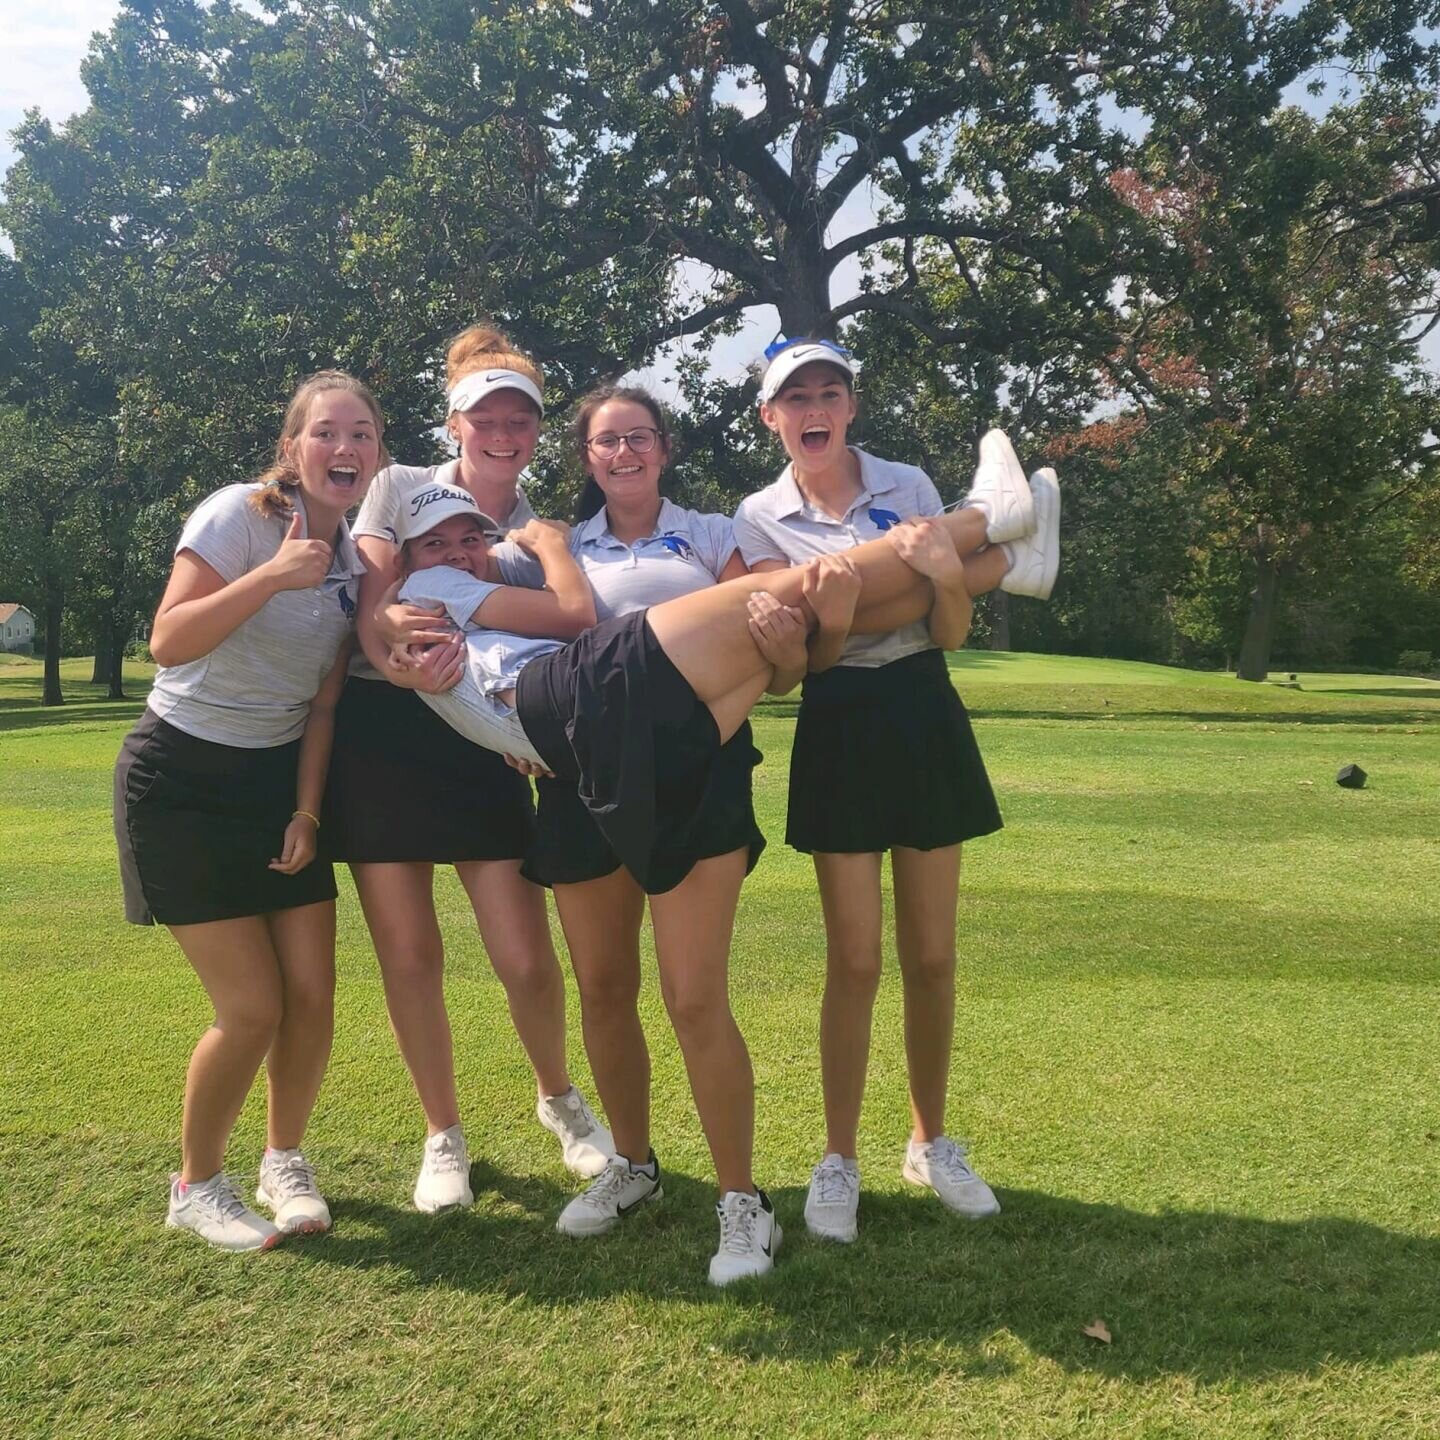 Marlee Edgeman won the Big 8 Conference tournament for the second consecutive year with 67 strokes on Monday, Oct. 2. Her team carried her in celebration. 


Contributed photo 